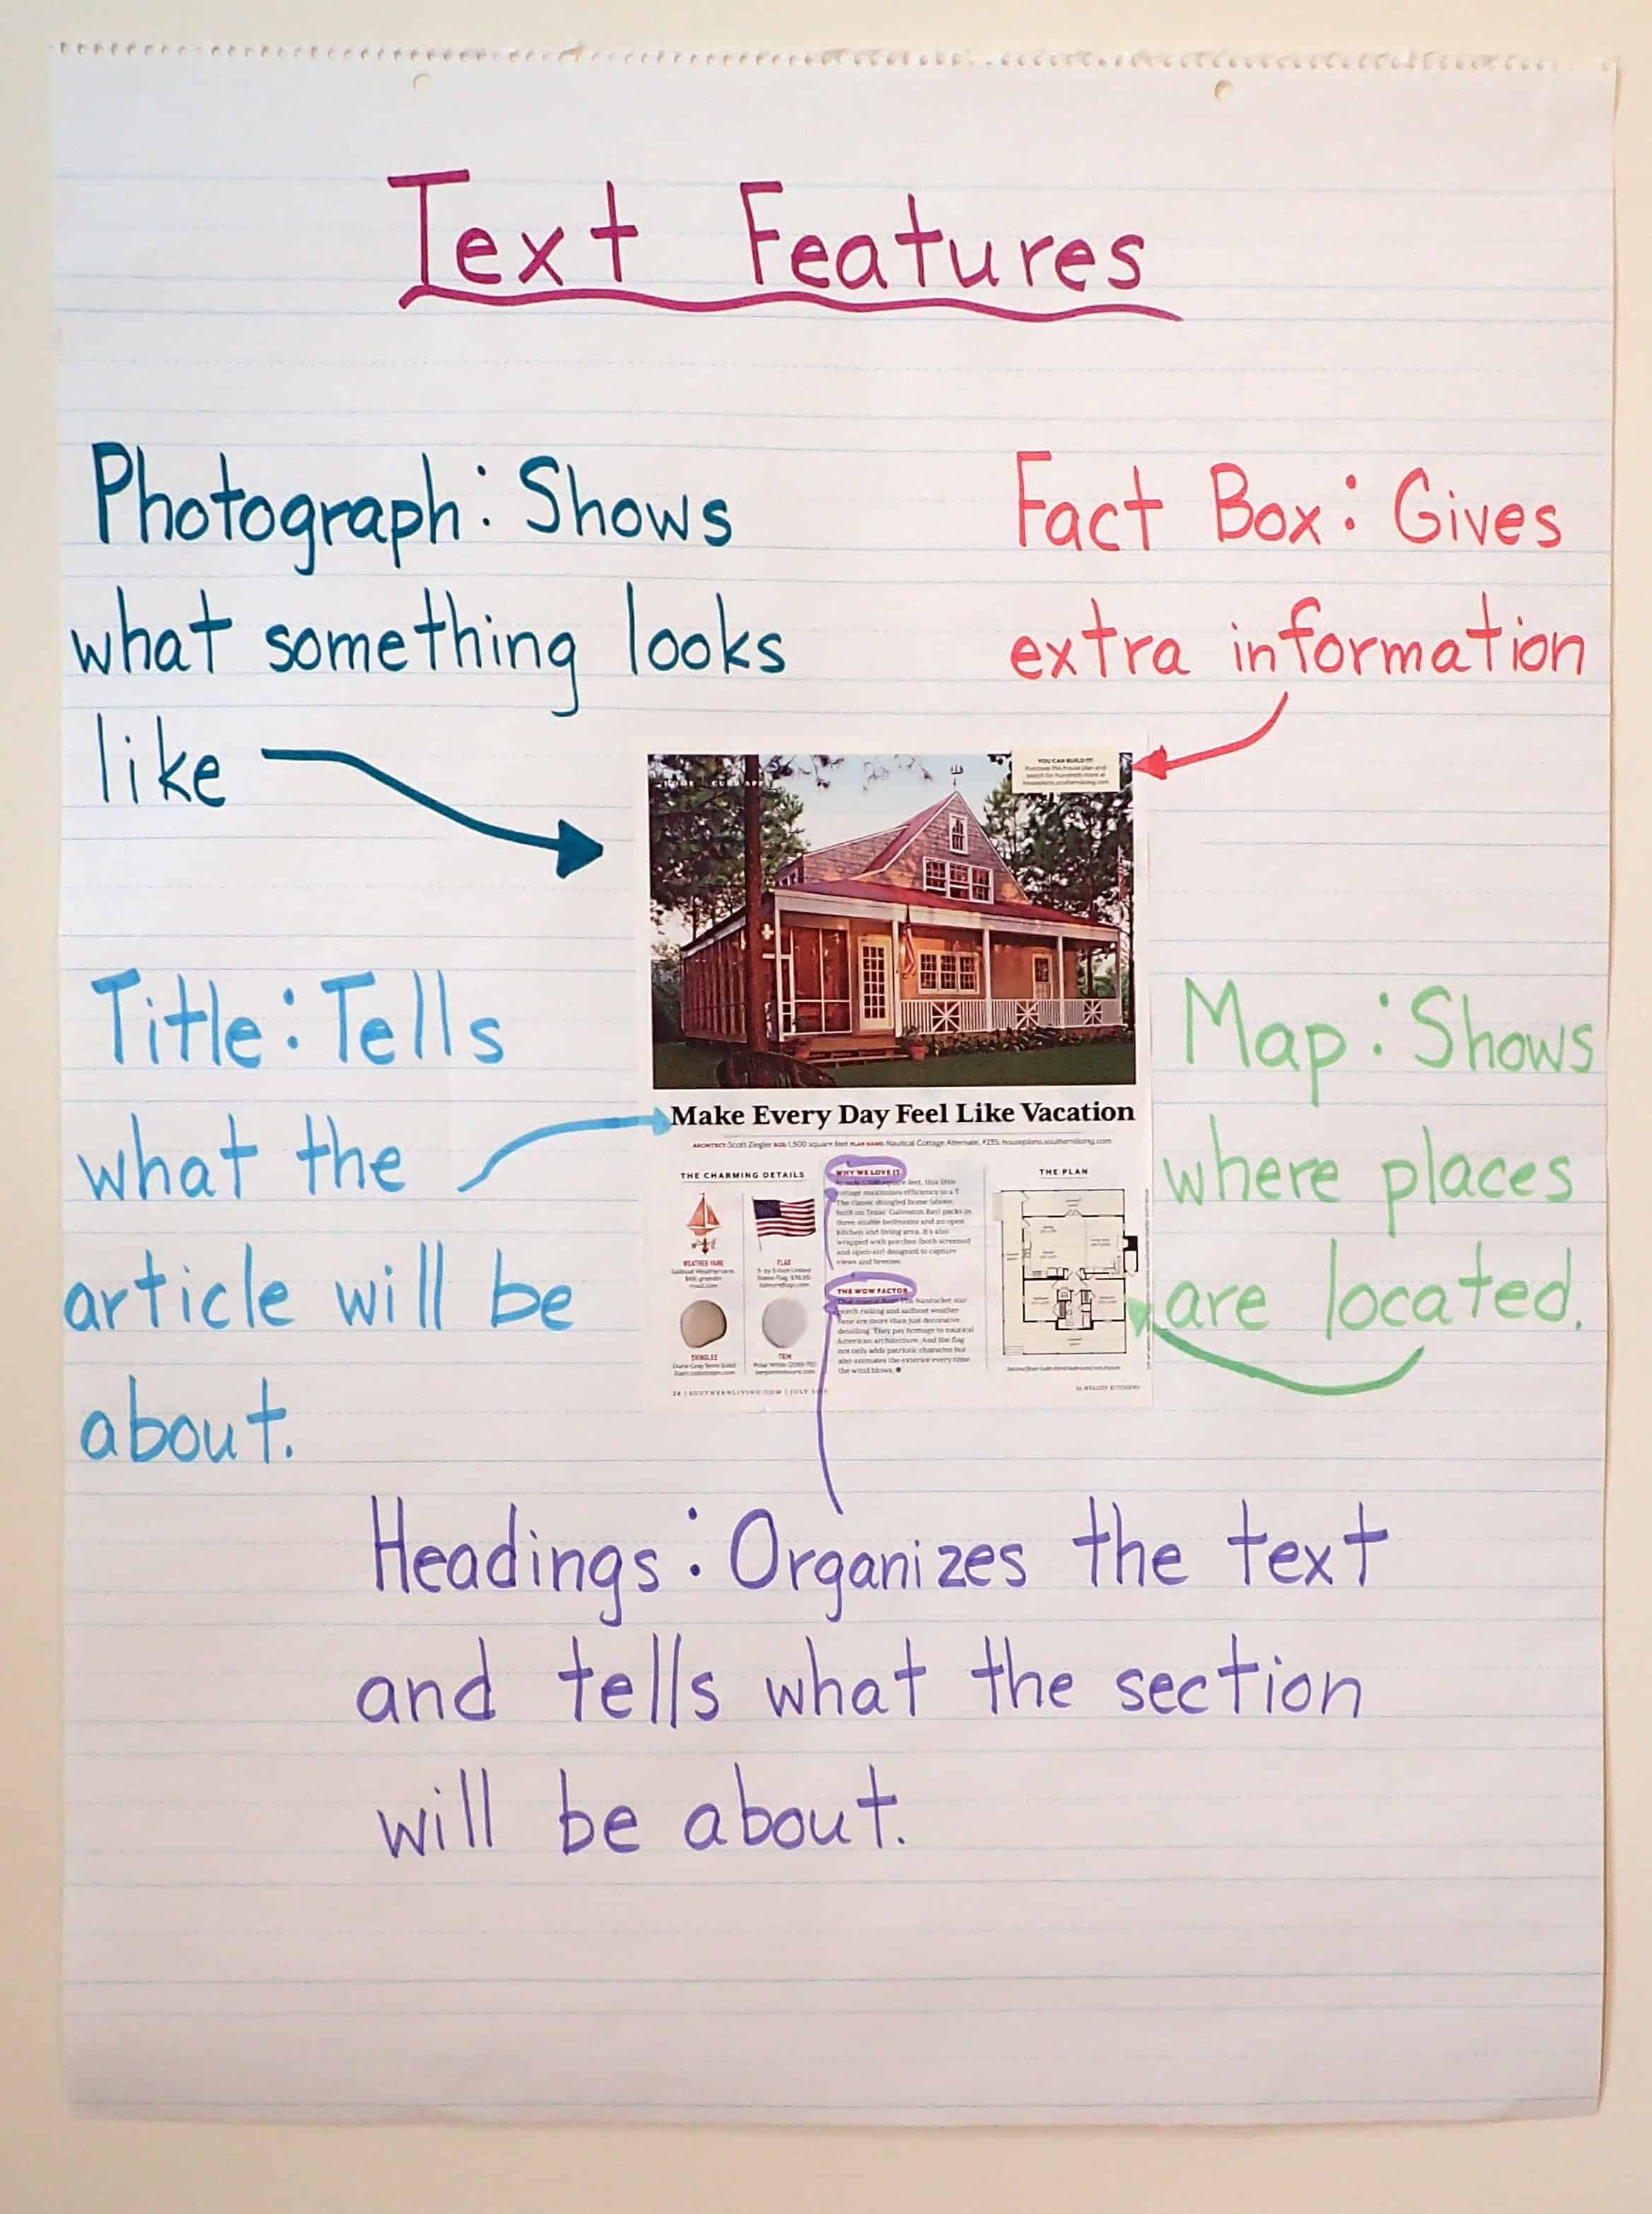 Have students create a poster using an old magazine page. Students identify the text features and the purpose of the text features found on the magazine page.